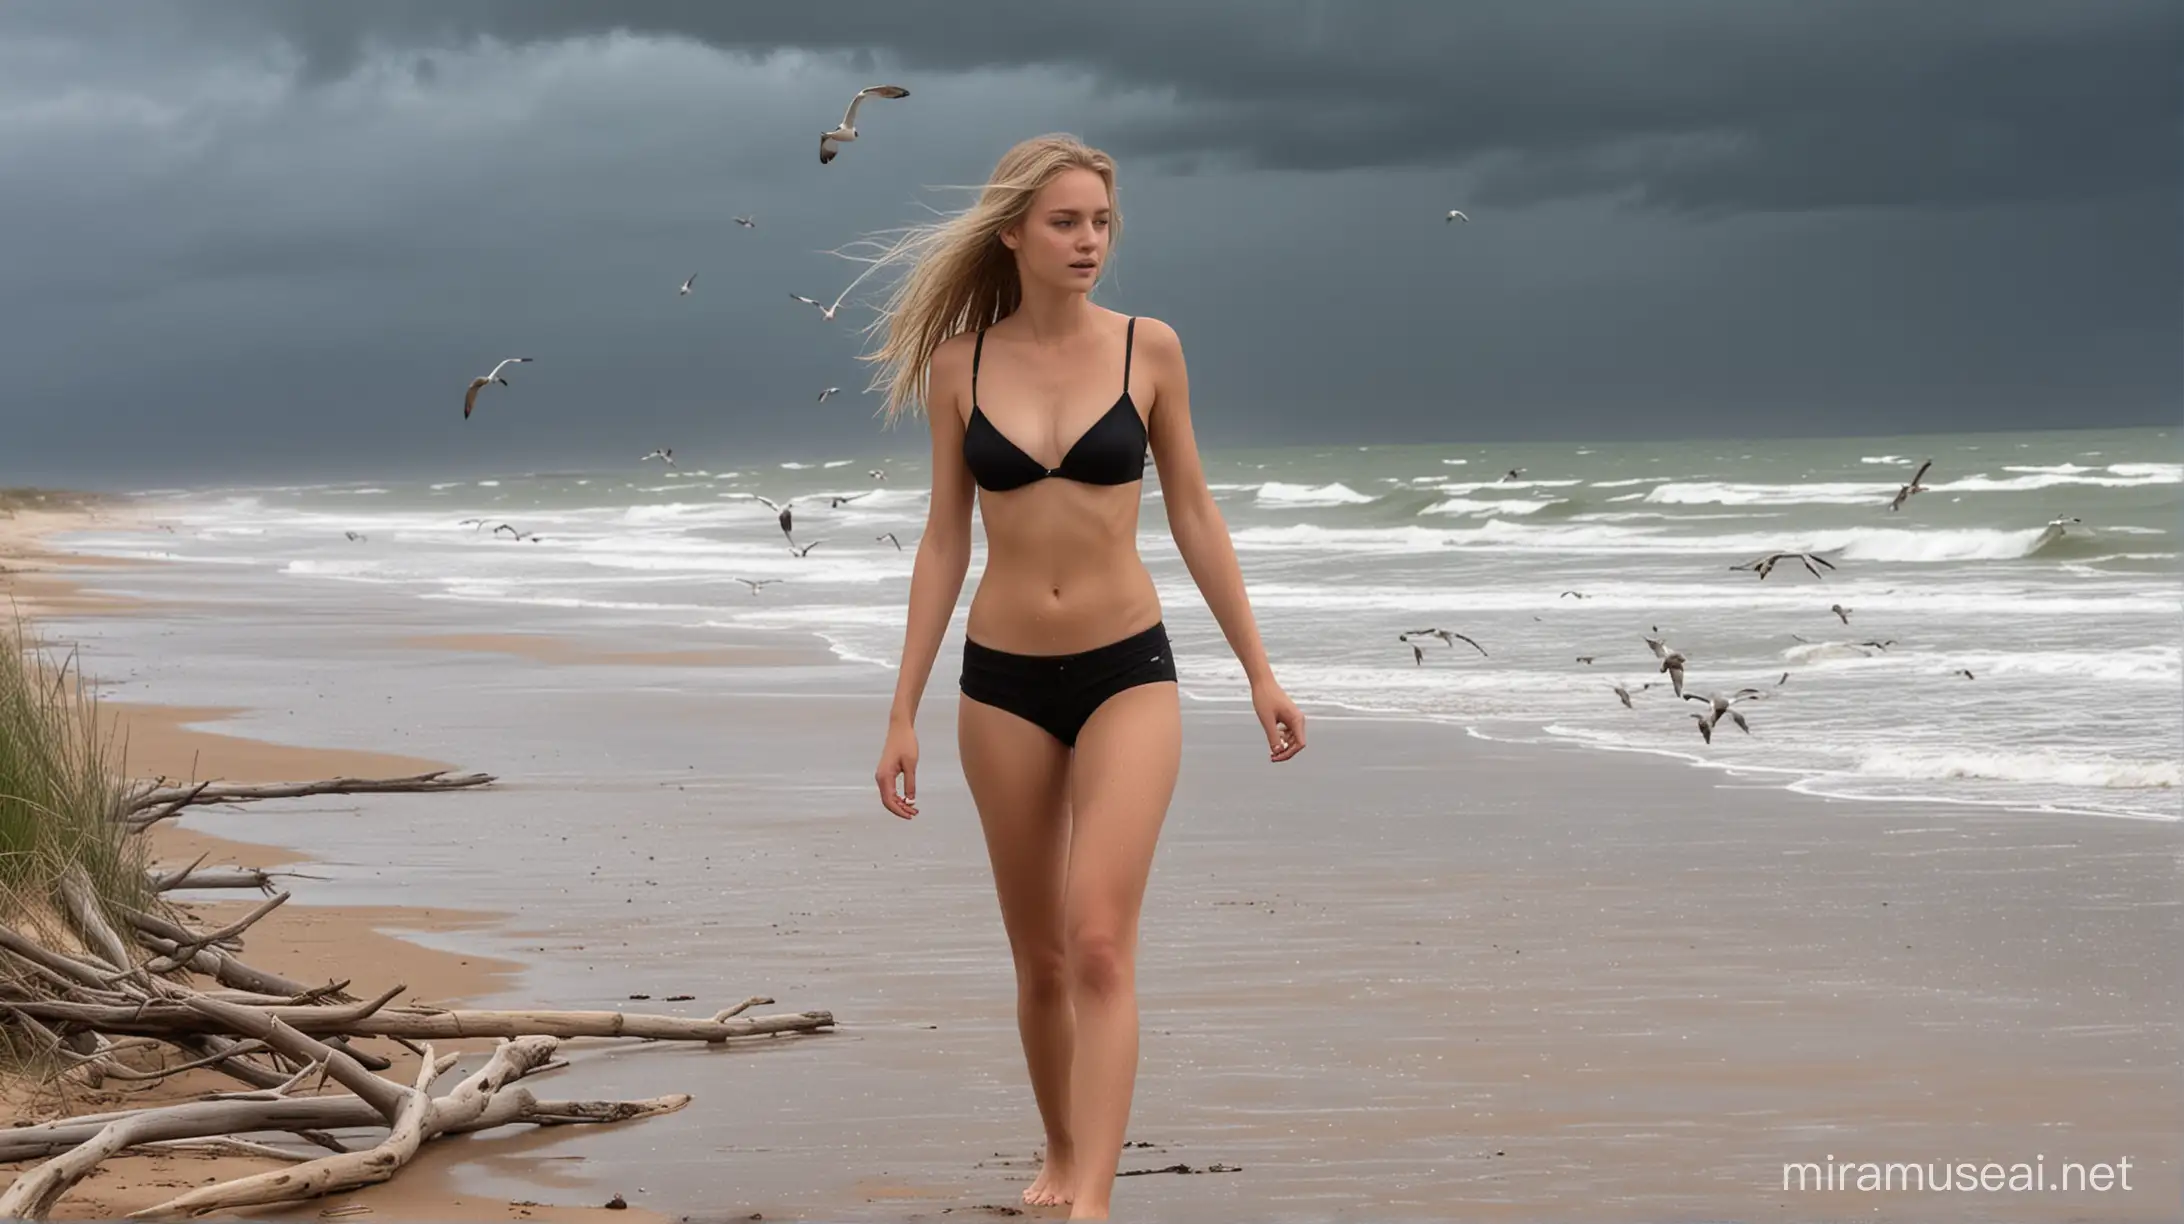 a gorgeous slender 18 year old European girl with 34DDD breasts, wearing black shorts, topless, long blond hair, walking in the rain along the beach next to  a dune landscape in the rain with a view of the sea. Dramatic   clouds, it is raining, some seagulls flying, driftwood laying on the beach.